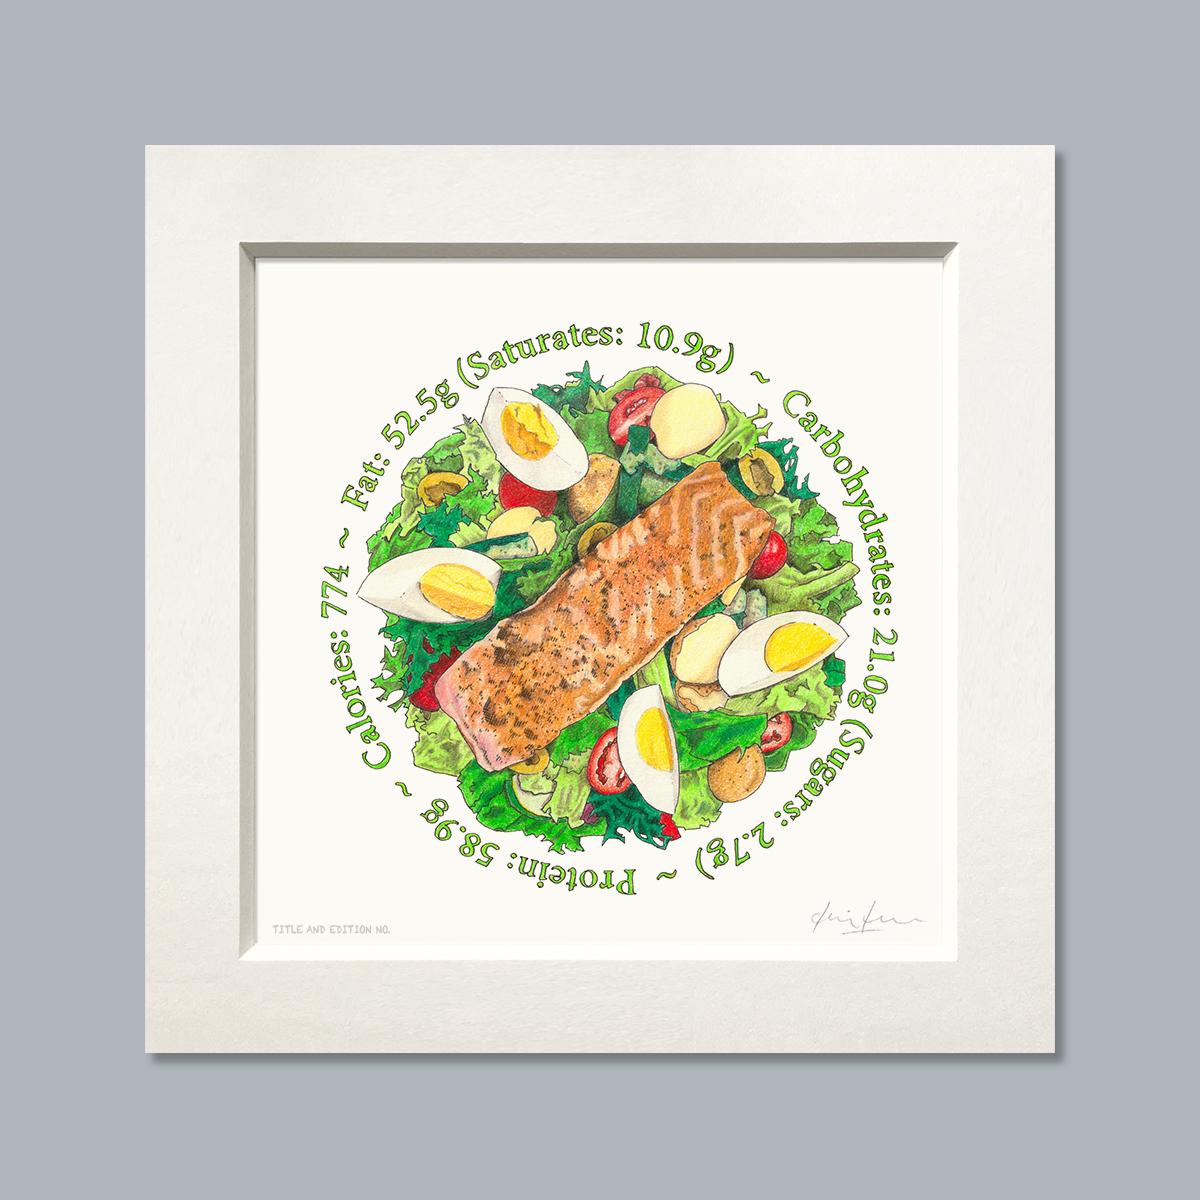 Limited edition print of coloured drawing of a plate of salmon salad, in a white mount.